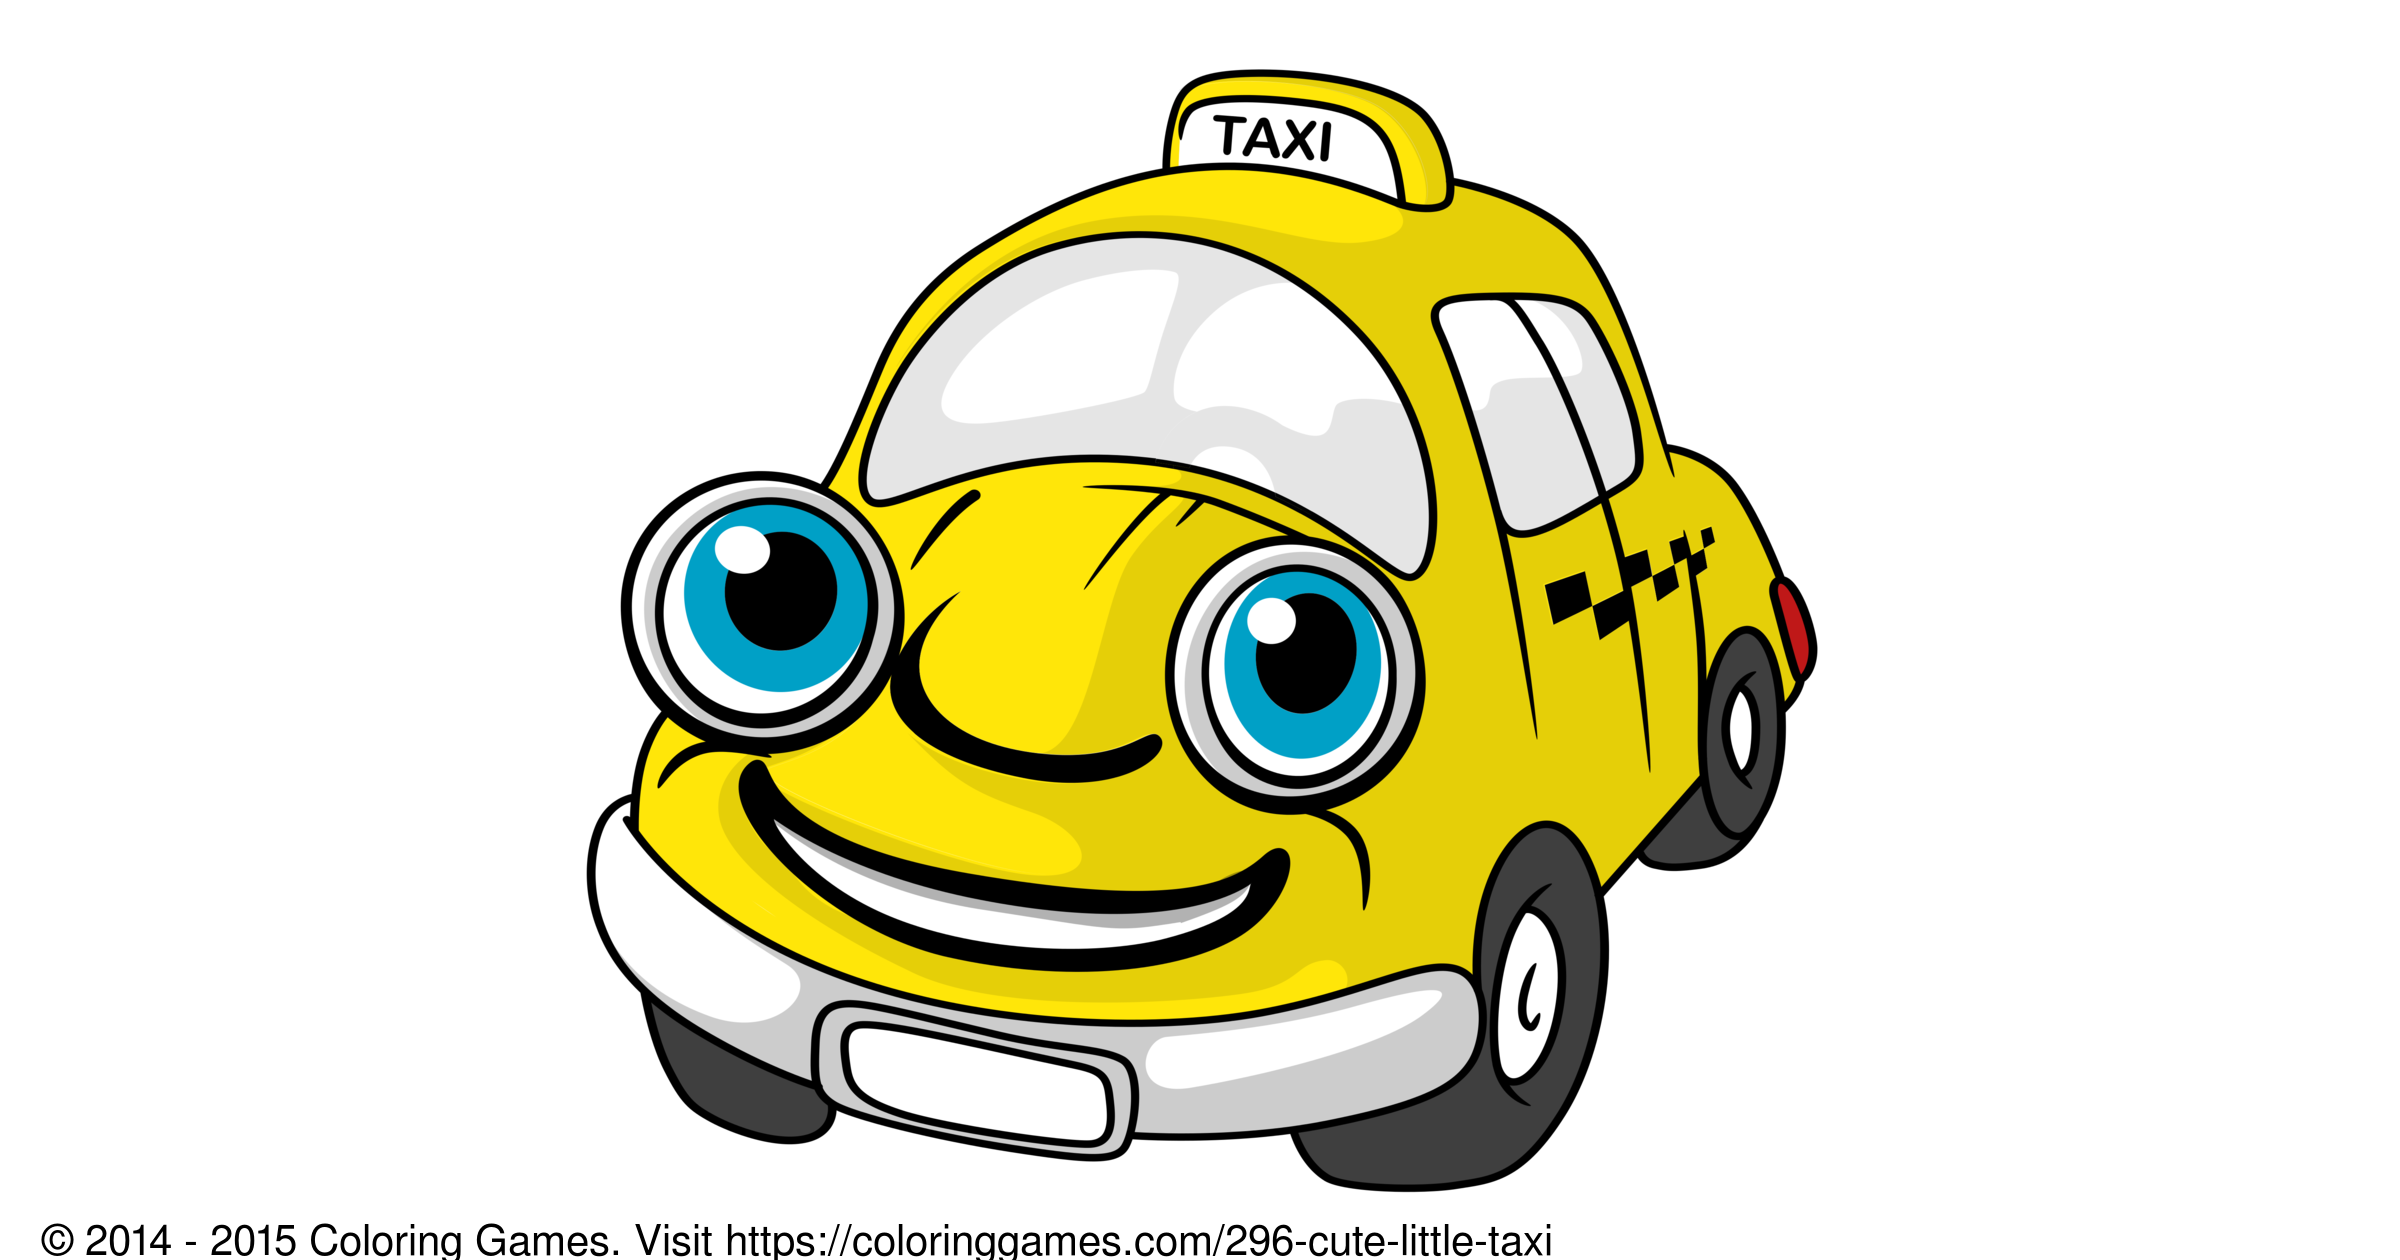 Cute Little Taxi - Coloring Games and Coloring Pages